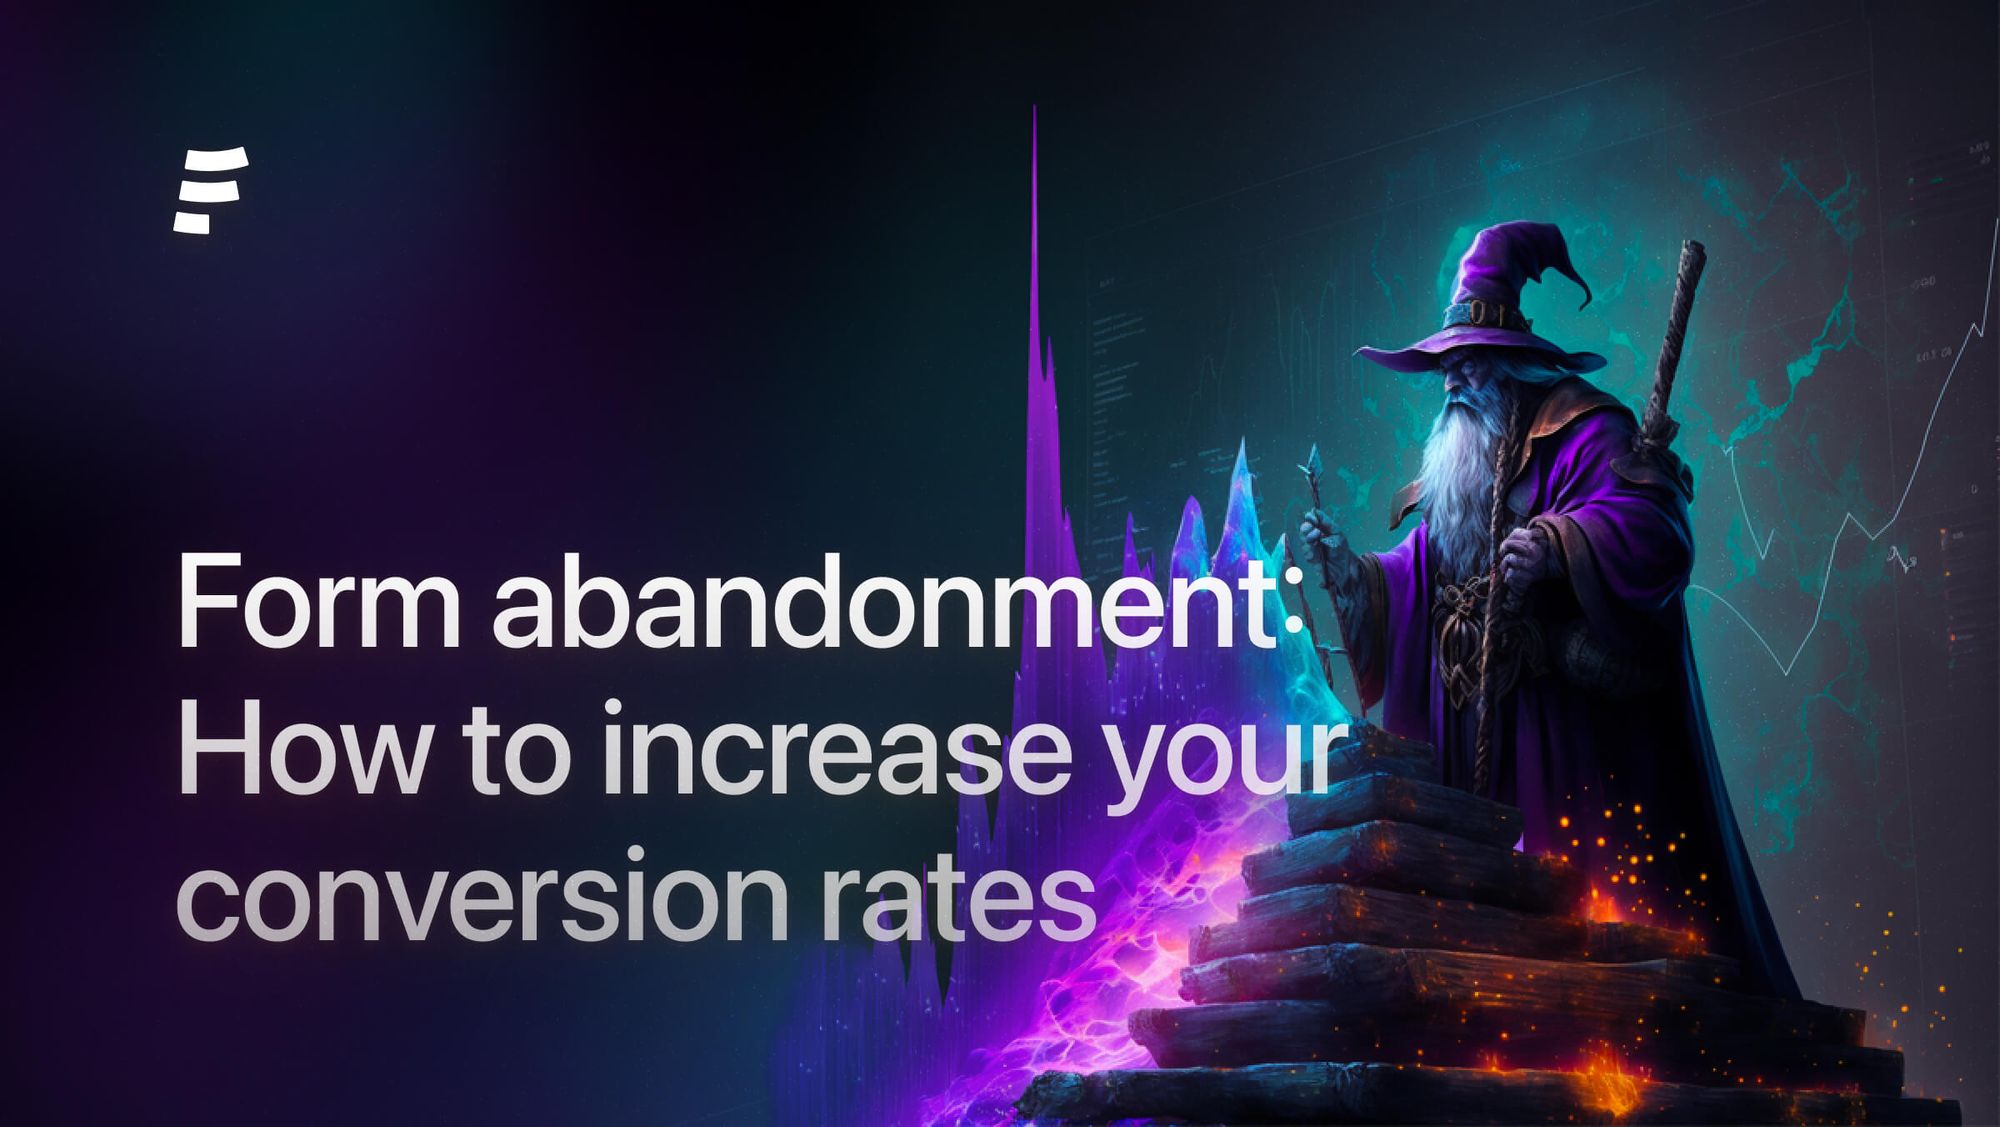 Form abandonment: How to increase your conversion rates